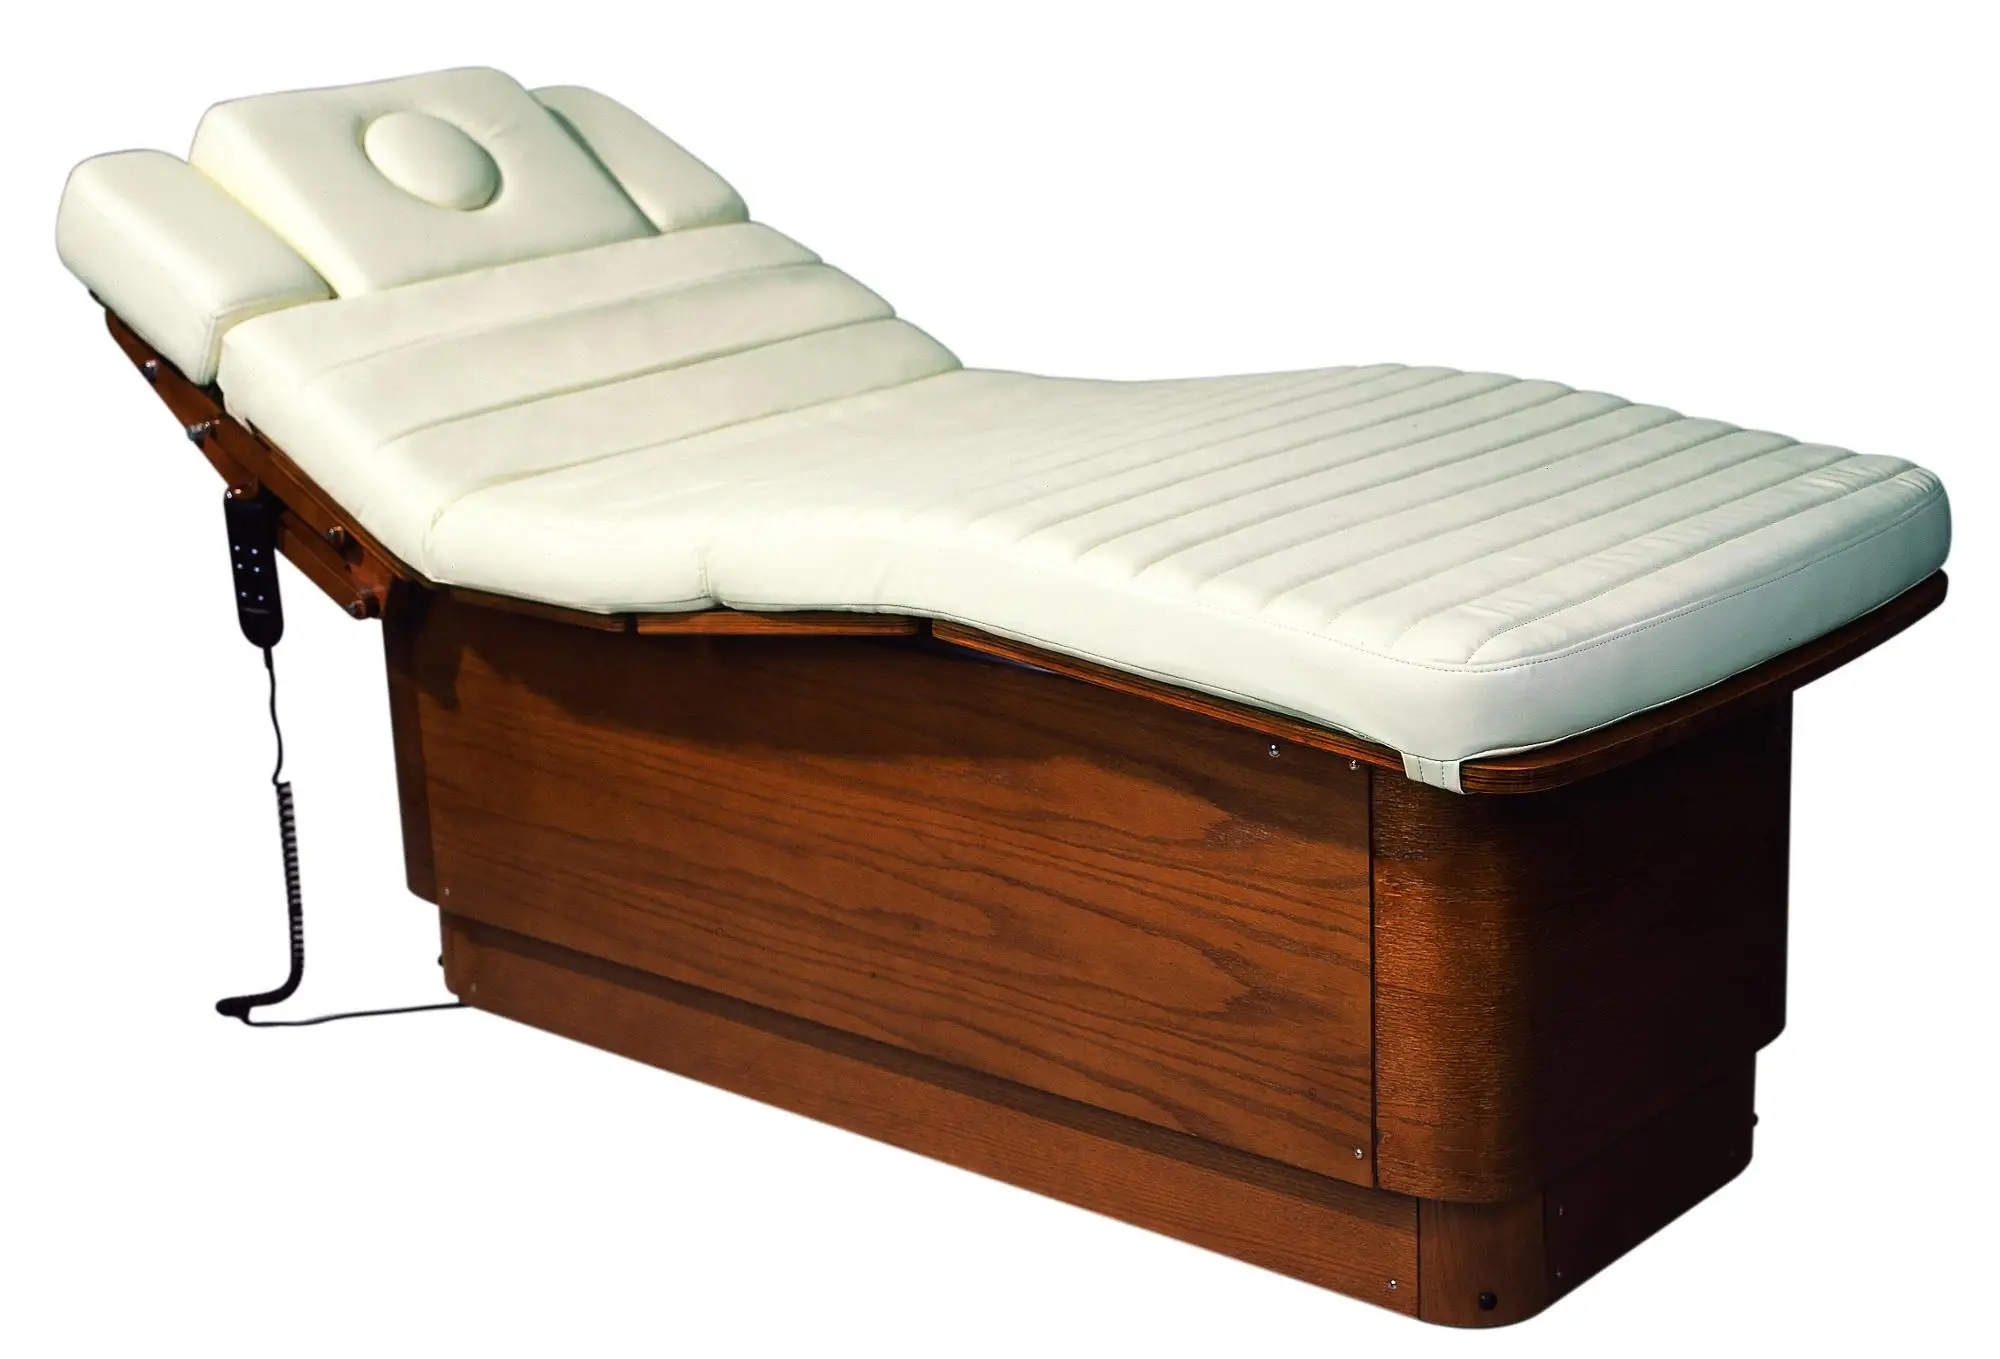 Kingshadow Luxury Vip Massage Spa Bed Massage Table Buy Spa Bed